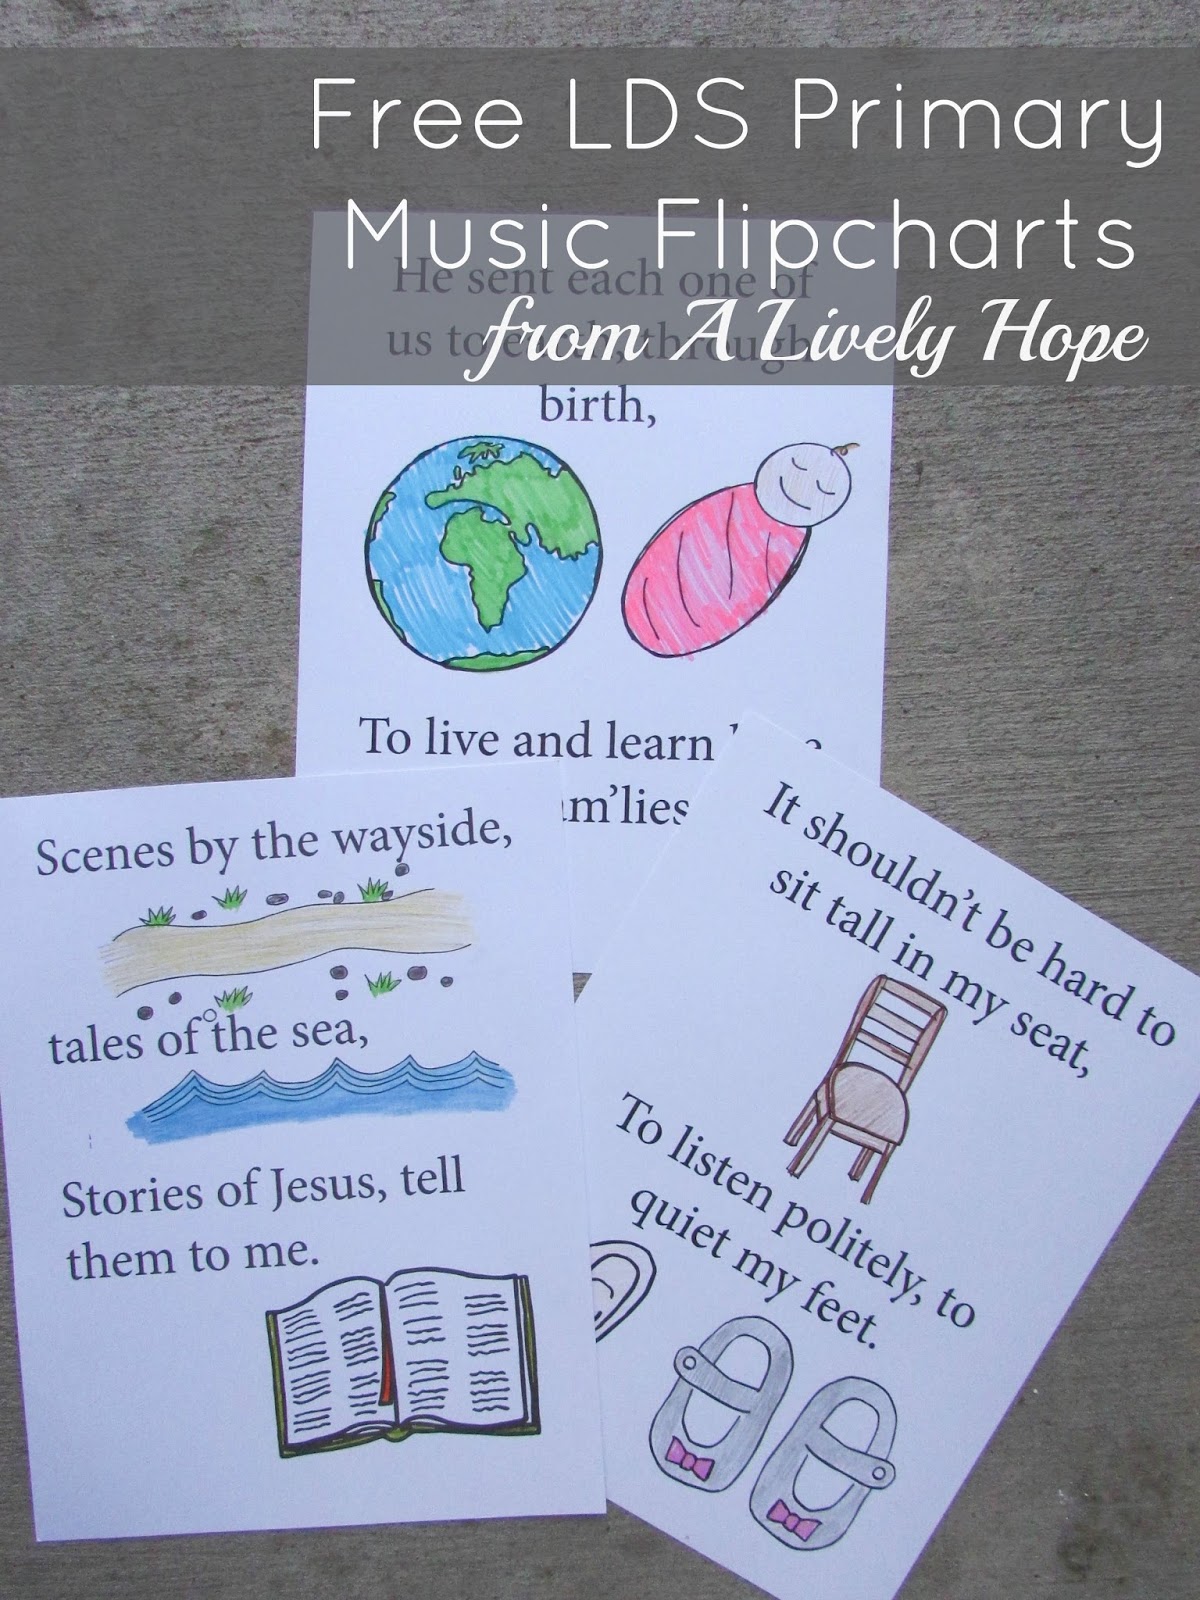 lds primary songs flipcharts singing coloring church own alivelyhope hope printables lively song flipchart lyrics them leader sing helps together